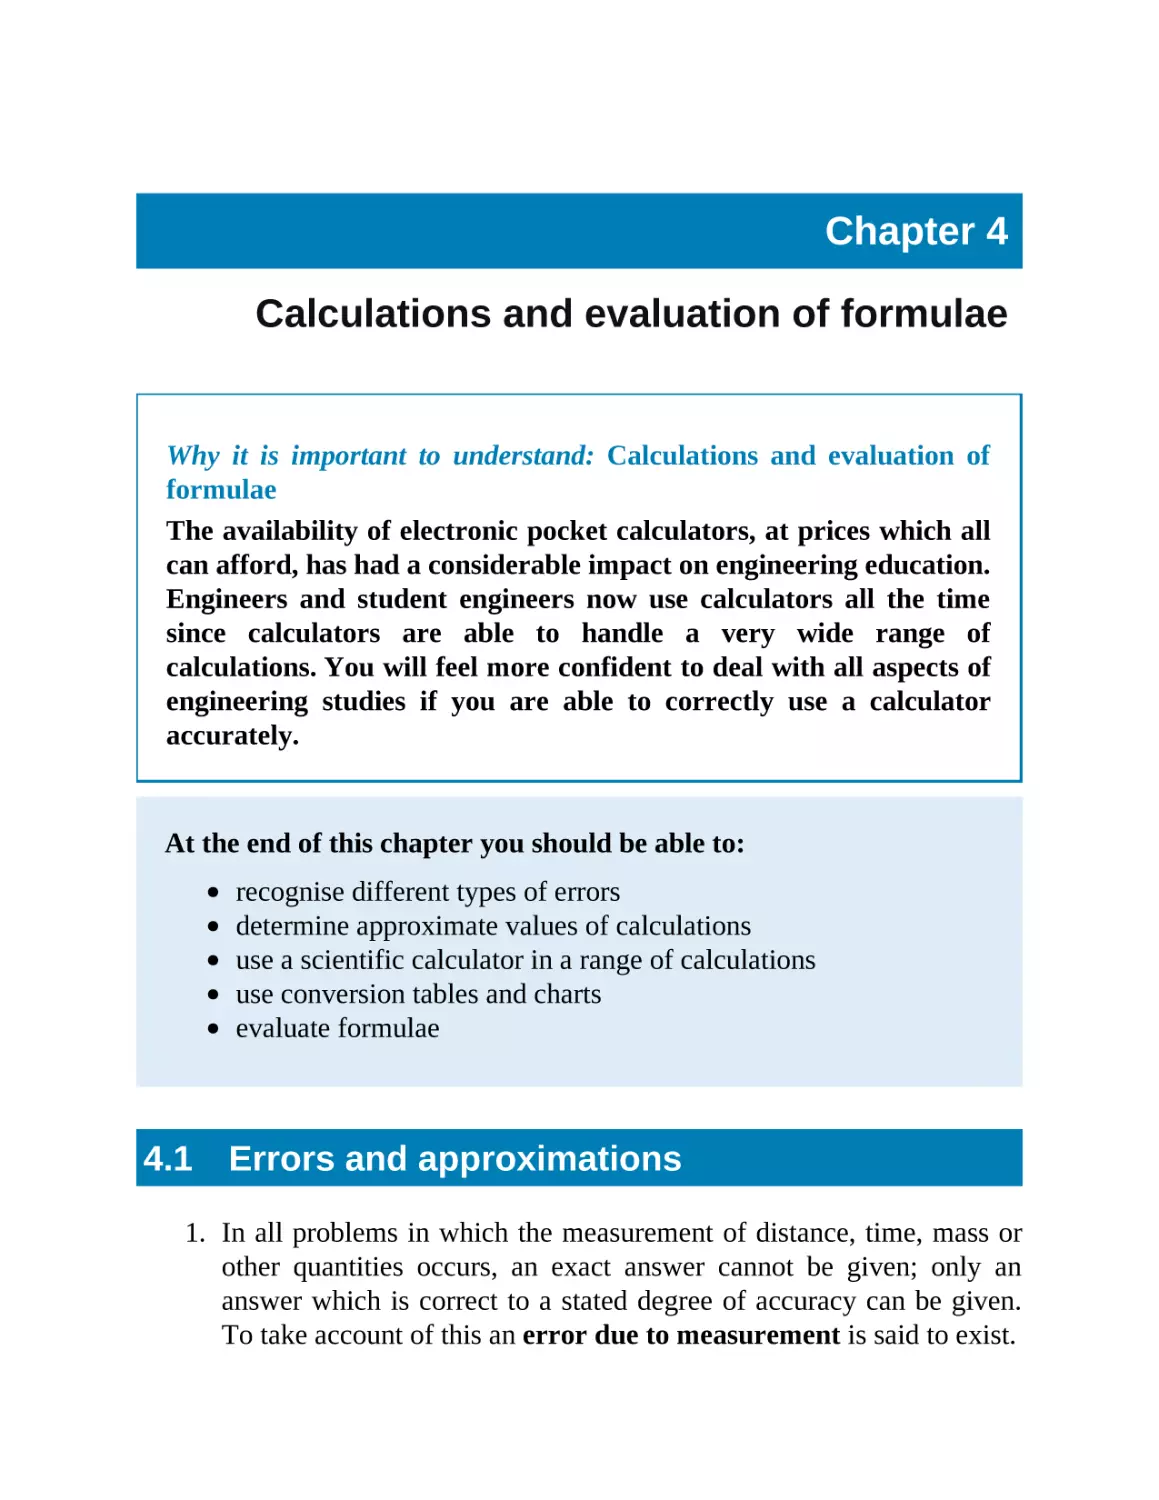 4 Calculations and evaluation of formulae
4.1 Errors and approximations